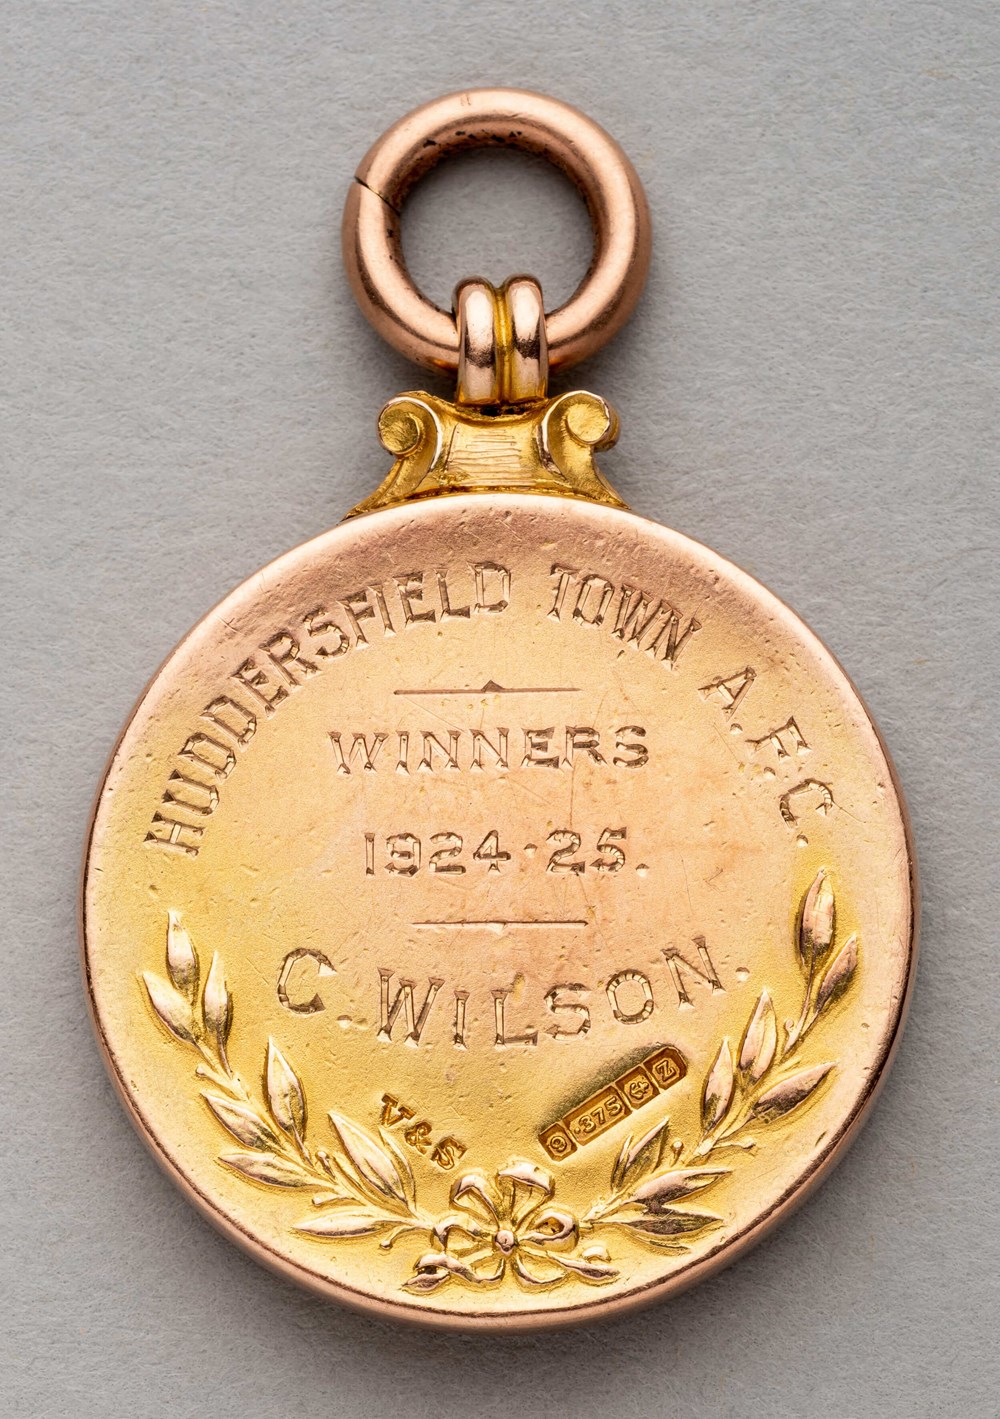 Huddersfield Town 1924-25 Football League Division One Championship medal awarded to Charlie Wilson